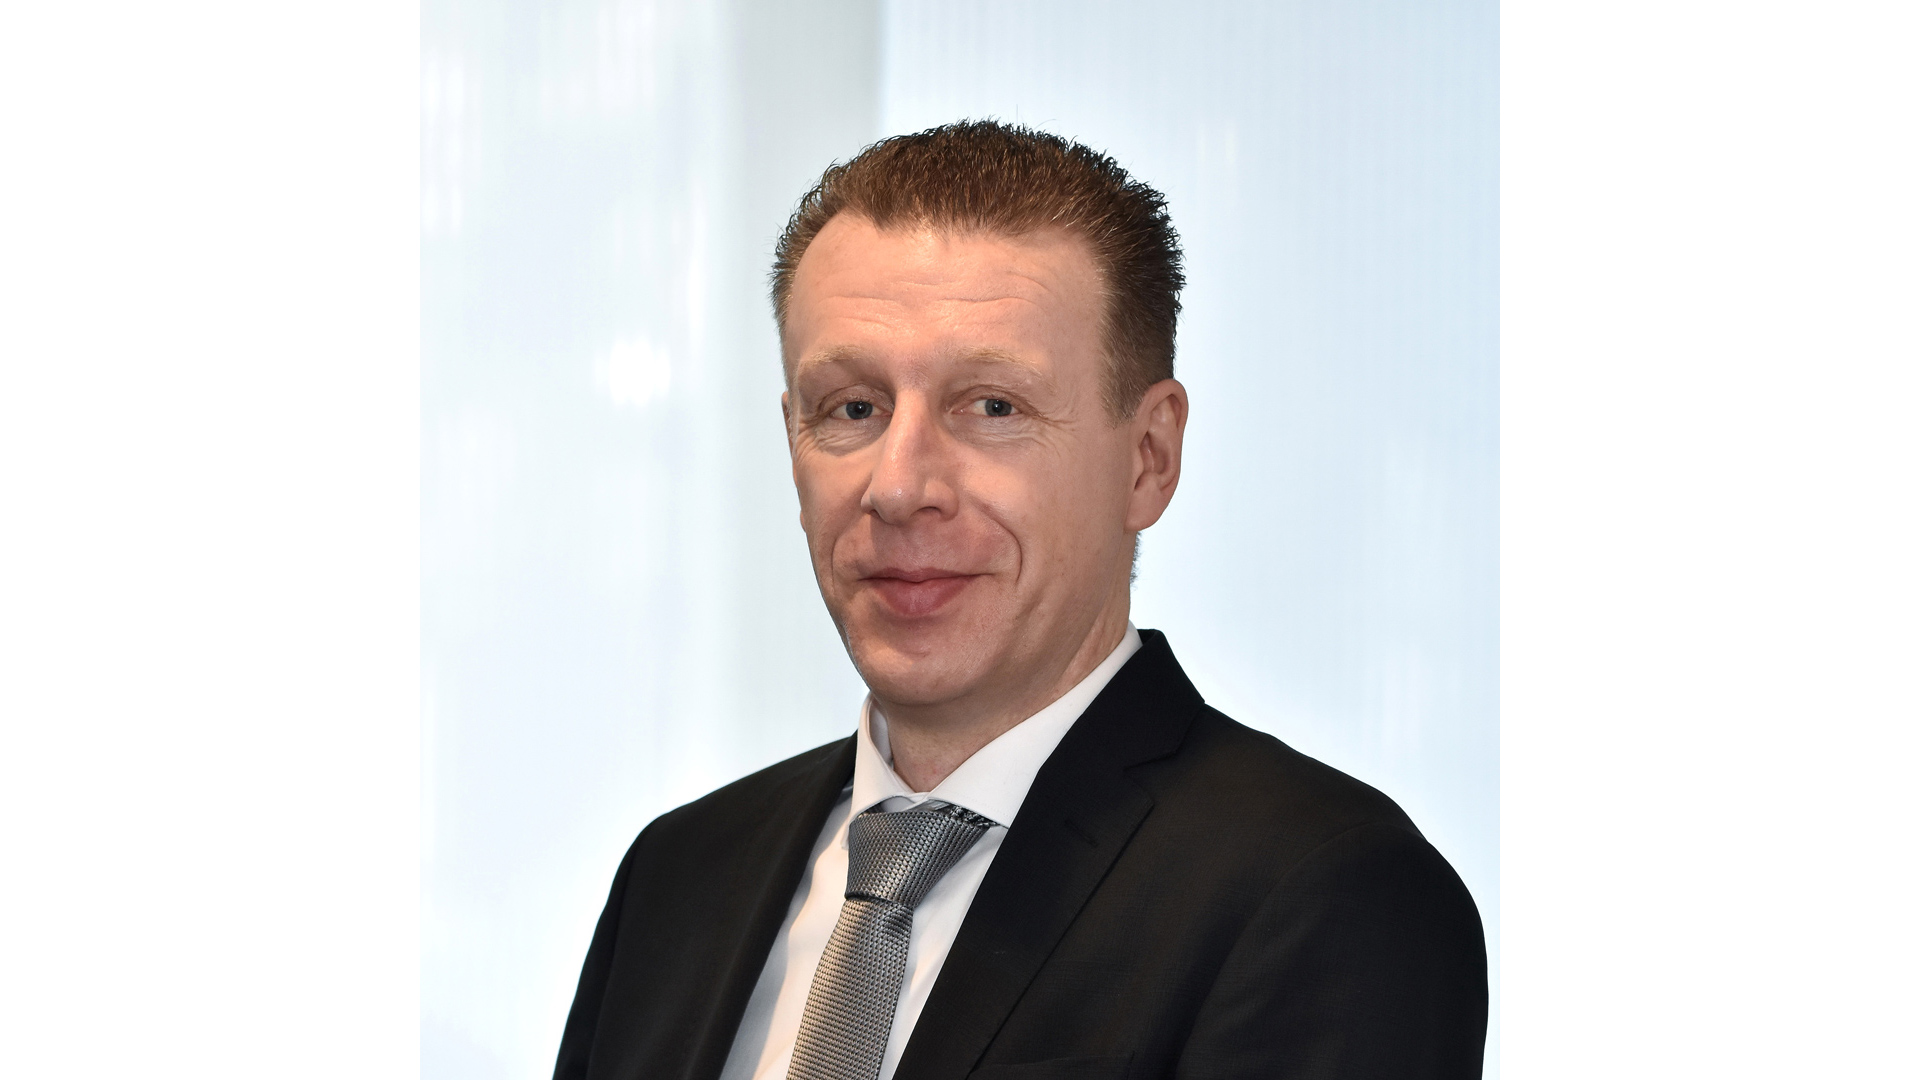 Werner Diwald, Chair of the Board at the German Hydrogen and Fuel Cell Association (DWV)